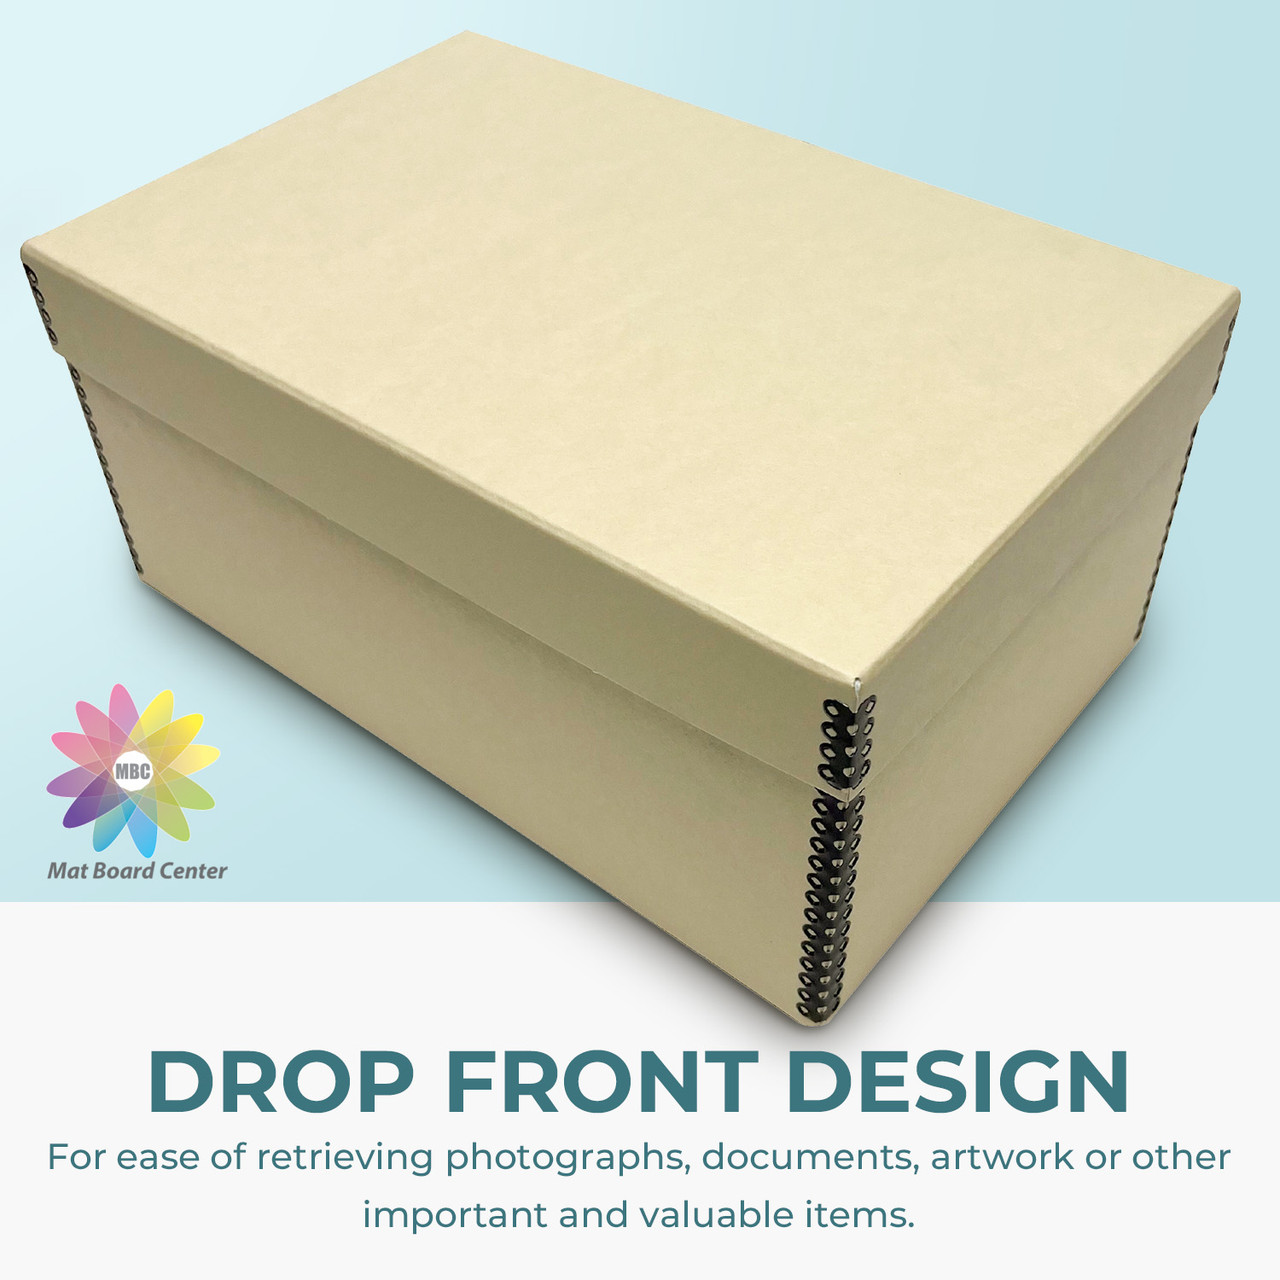 Lineco Tan Photo Storage Box 5x7x12 Inches with Drop Front Design